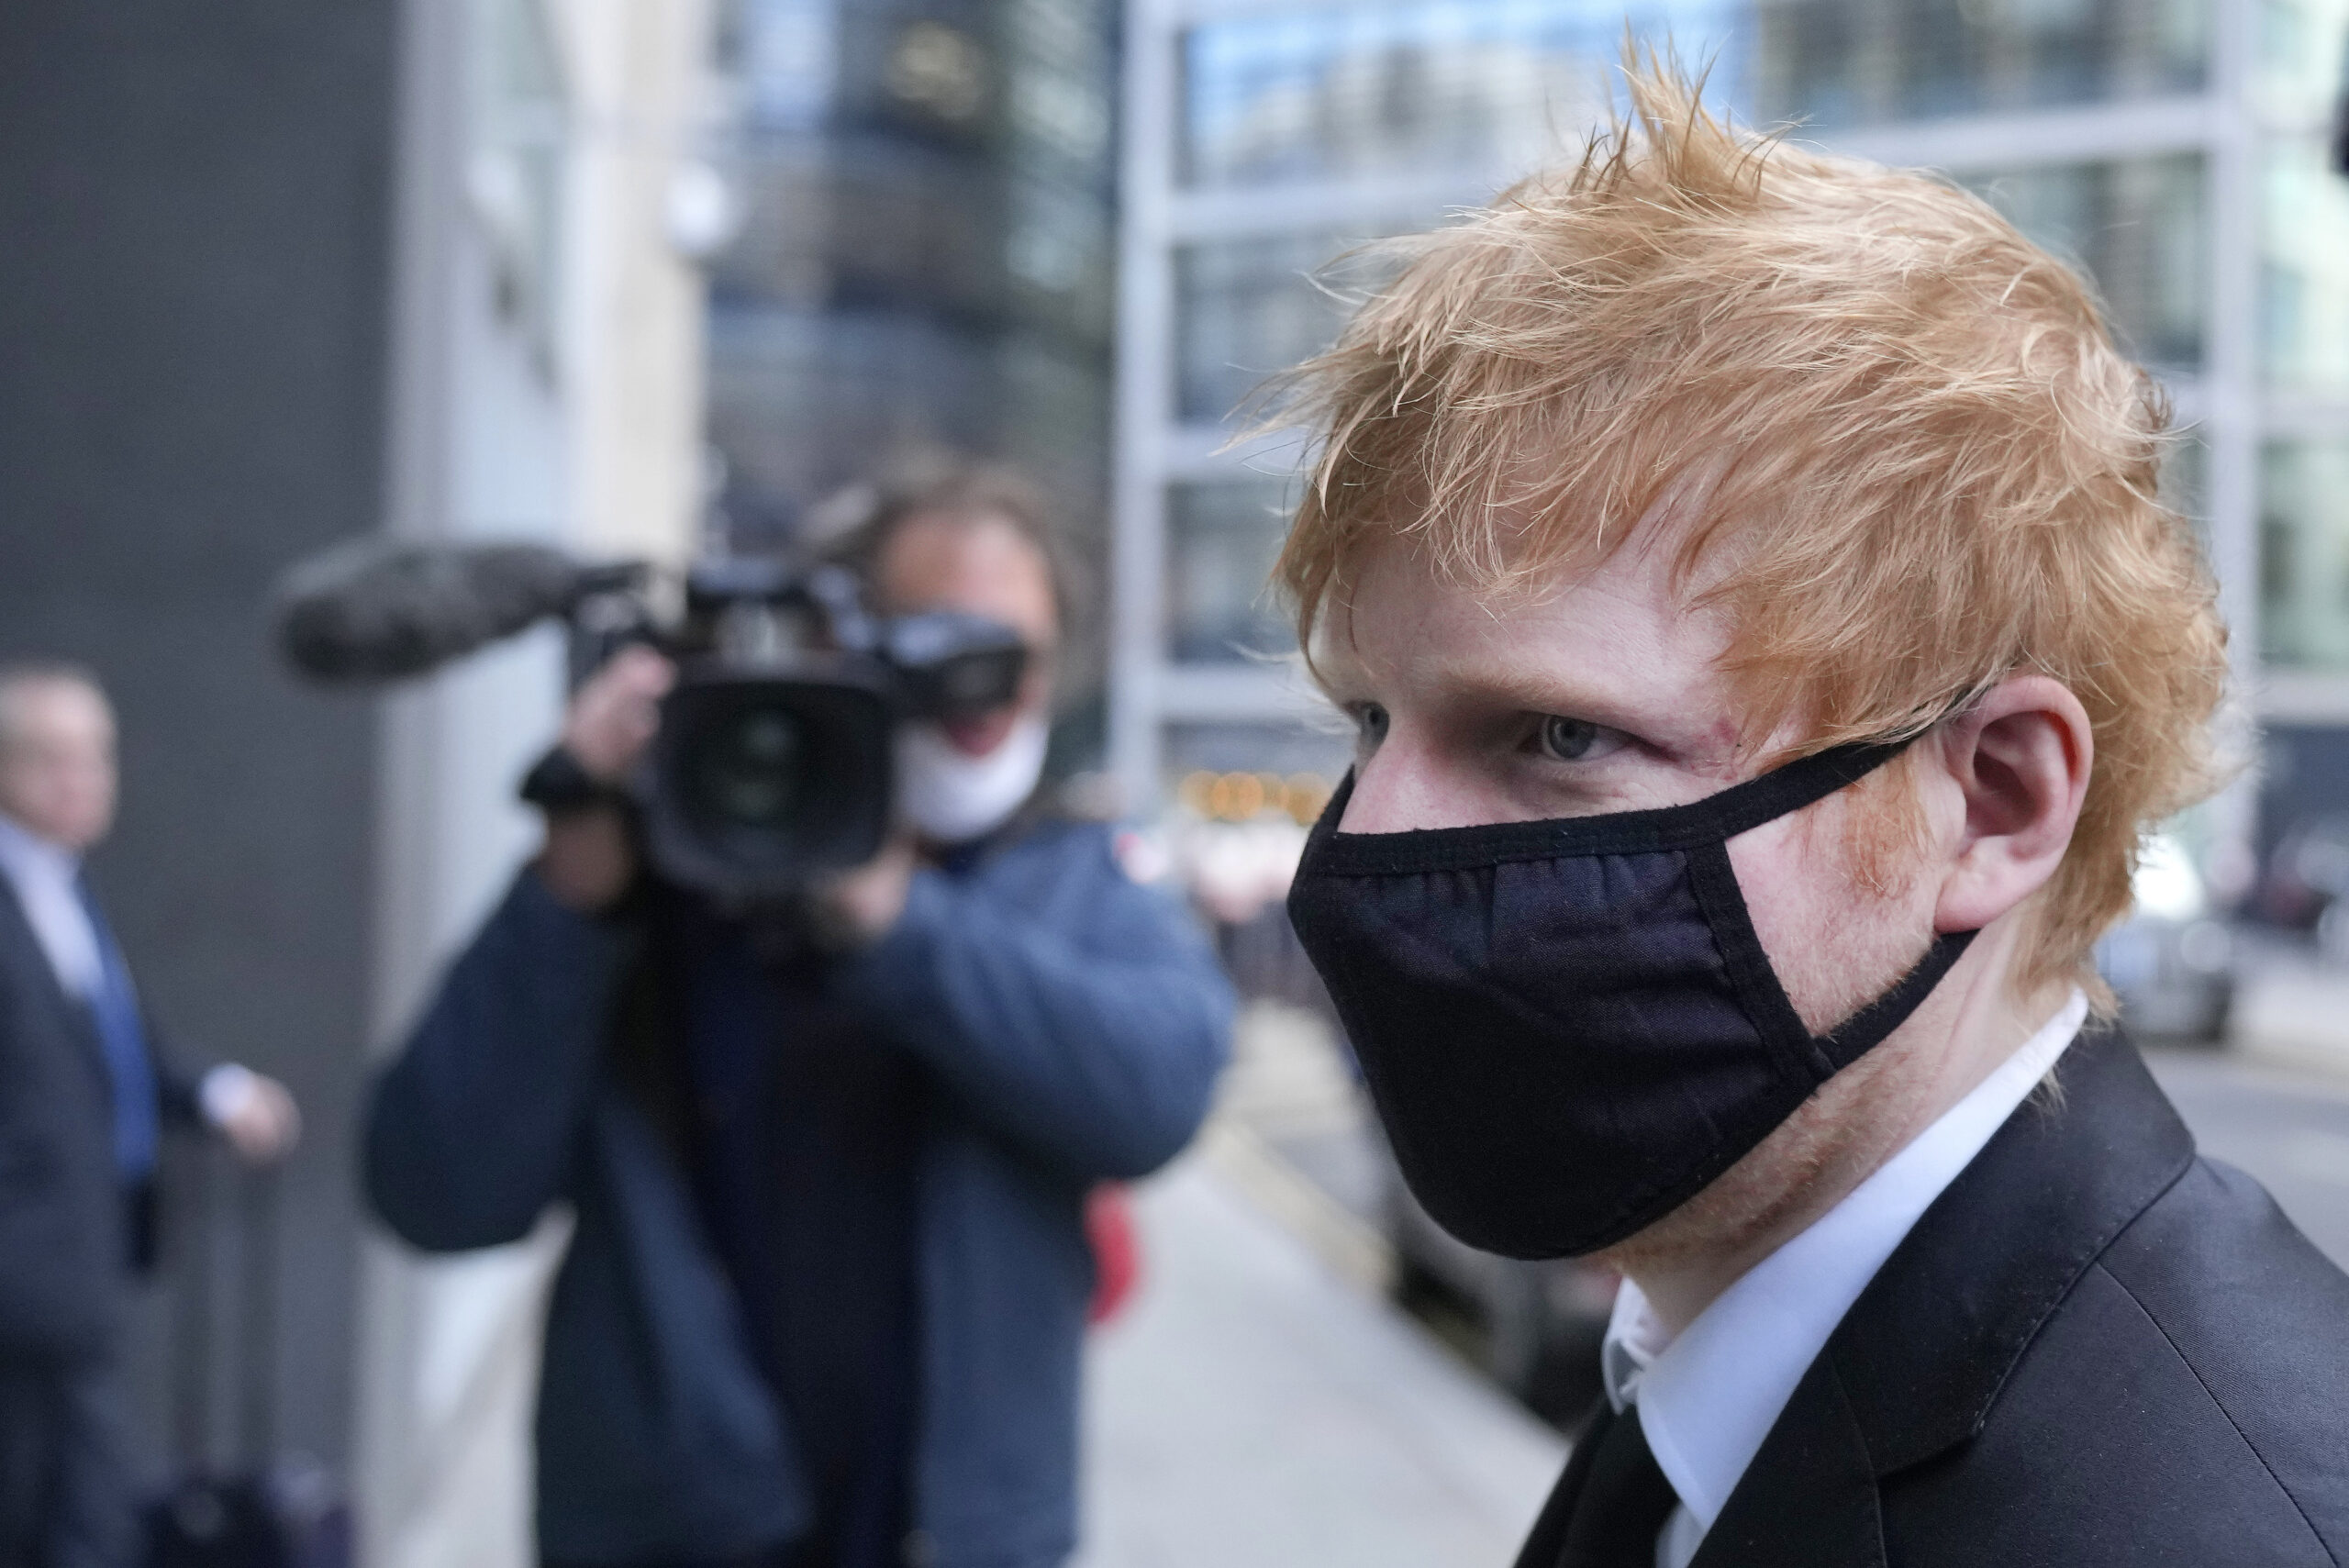 FILE - Musician Ed Sheeran arrives at the Rolls Building, High Court in central London, on March 15, 2022. Grammy Award-winning songwriter Ed Sheeran has won Wednesday, April 6, 2022, a U.K. copyright battle over the 2017 hit “Shape of You.’’ (AP Photo/Frank Augstein)